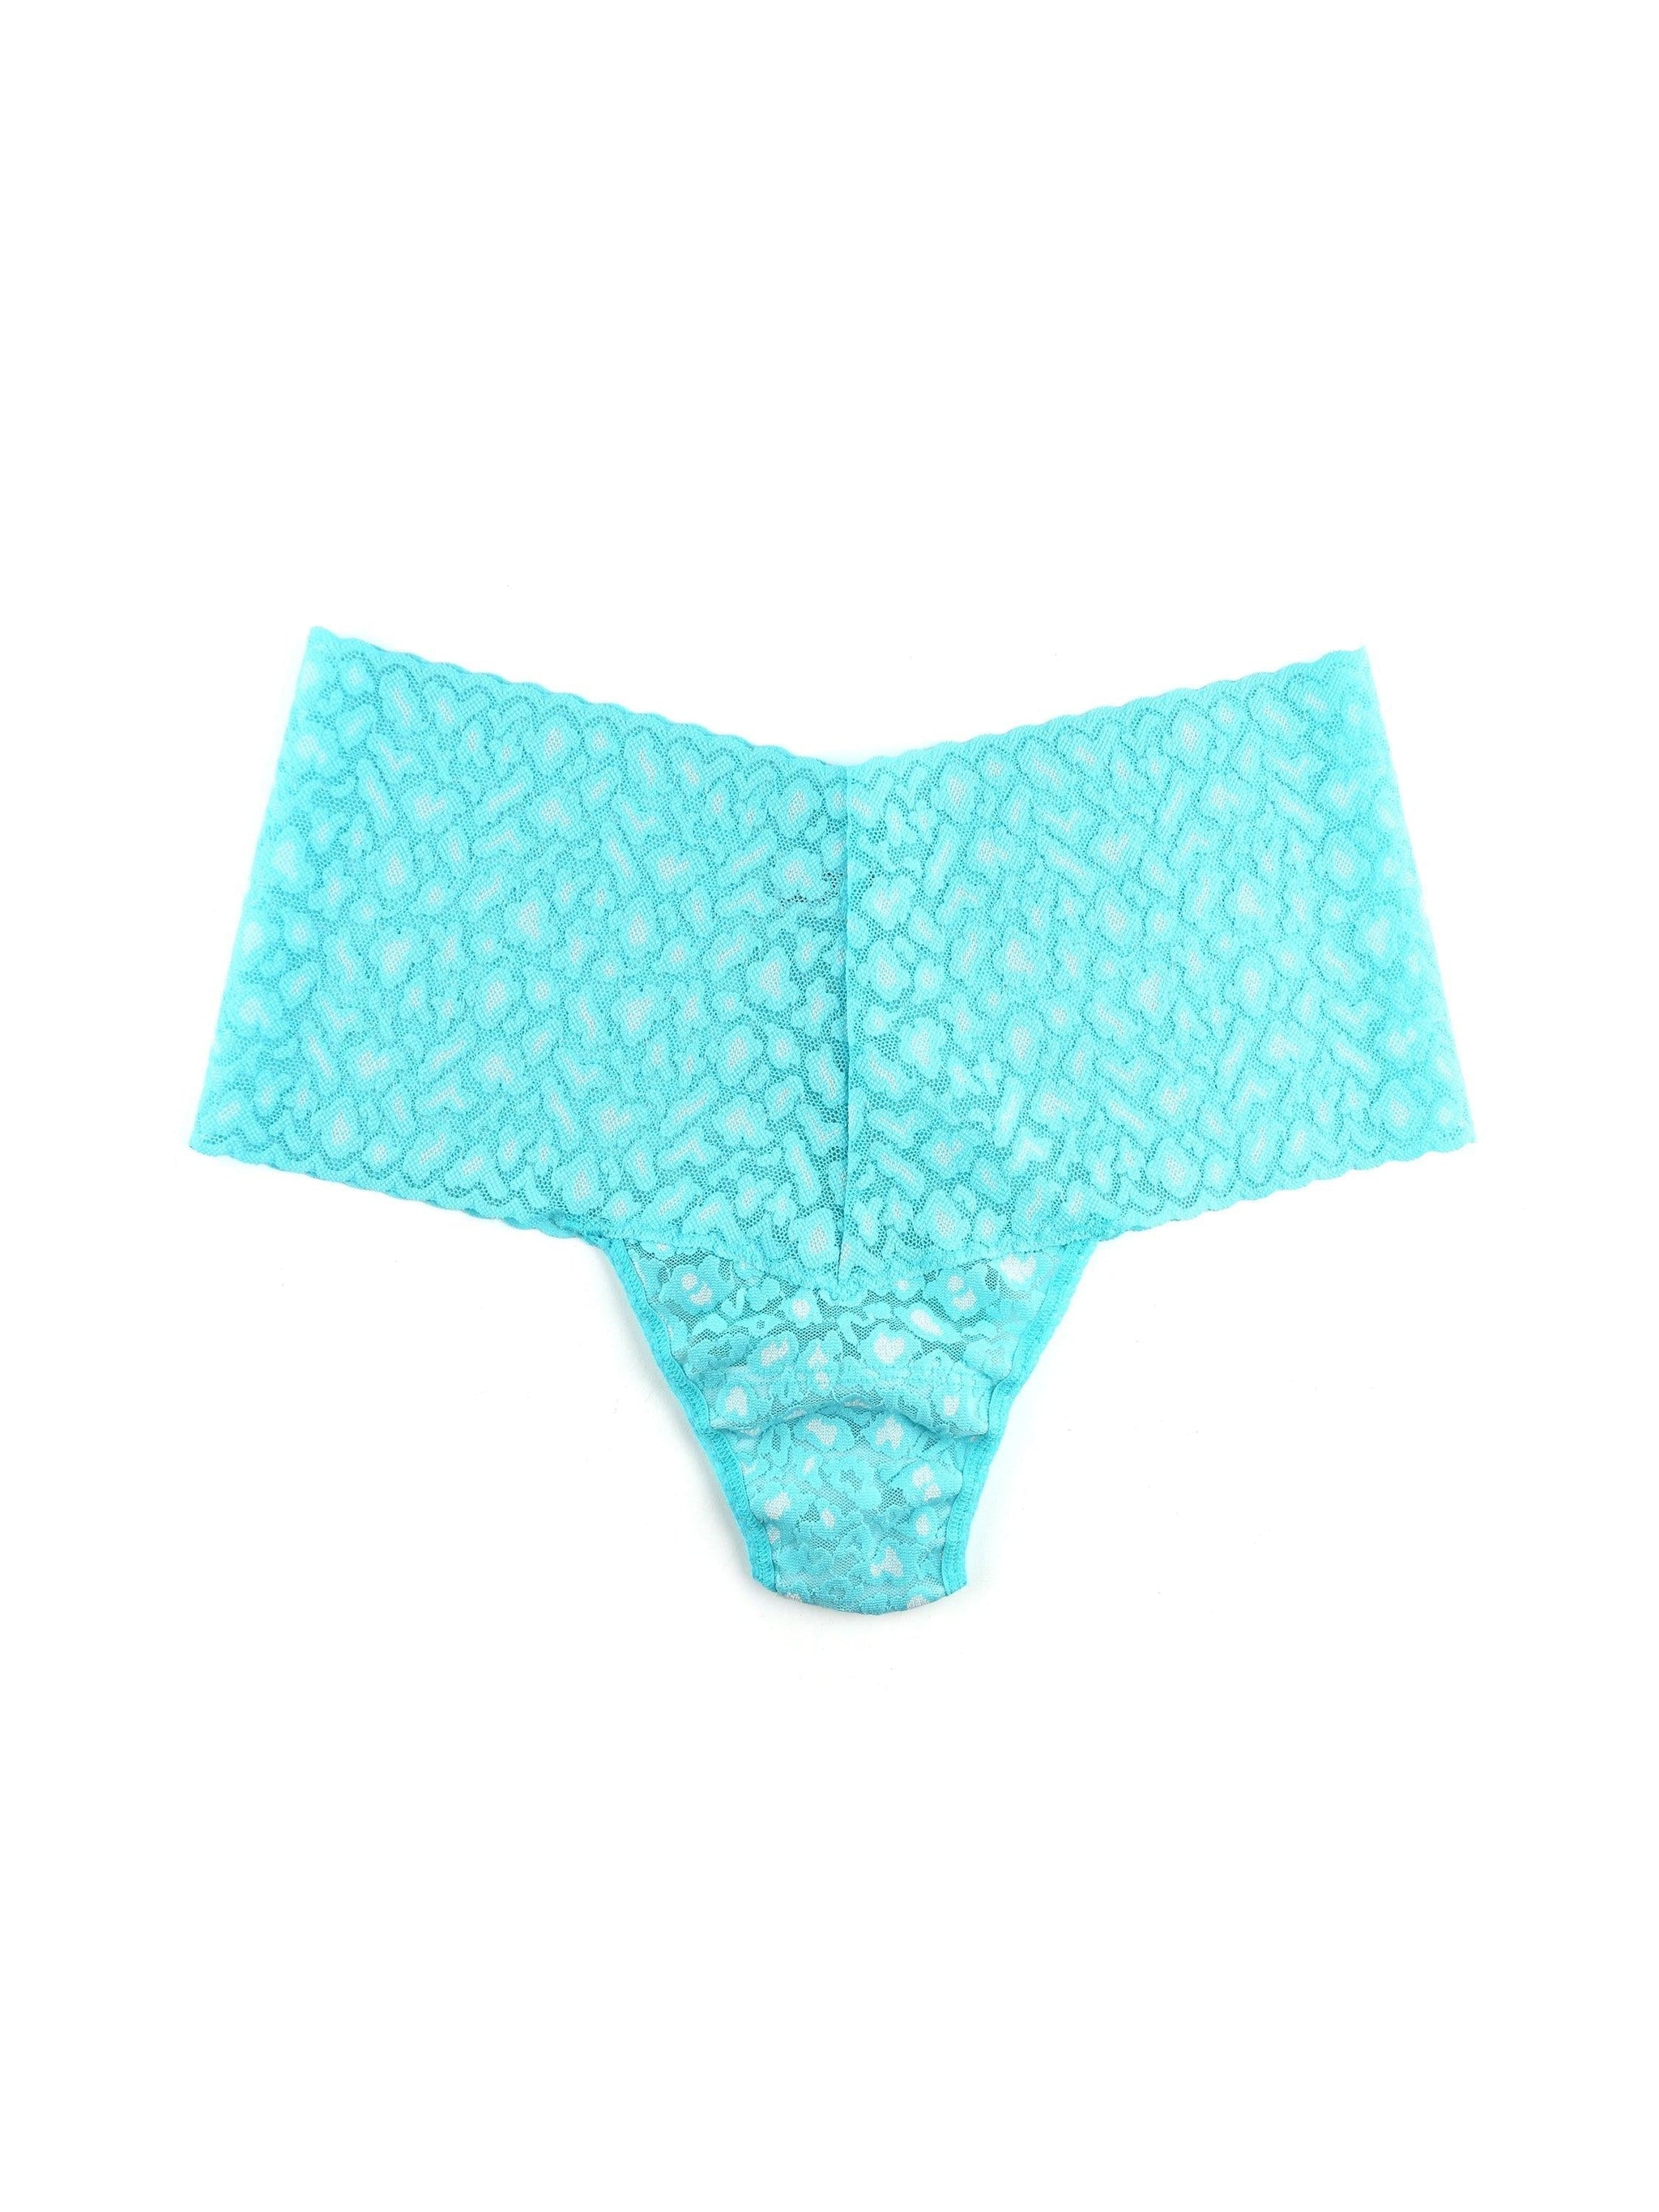 Cross-Dyed Leopard Retro Thong Radiant Turquoise/ White